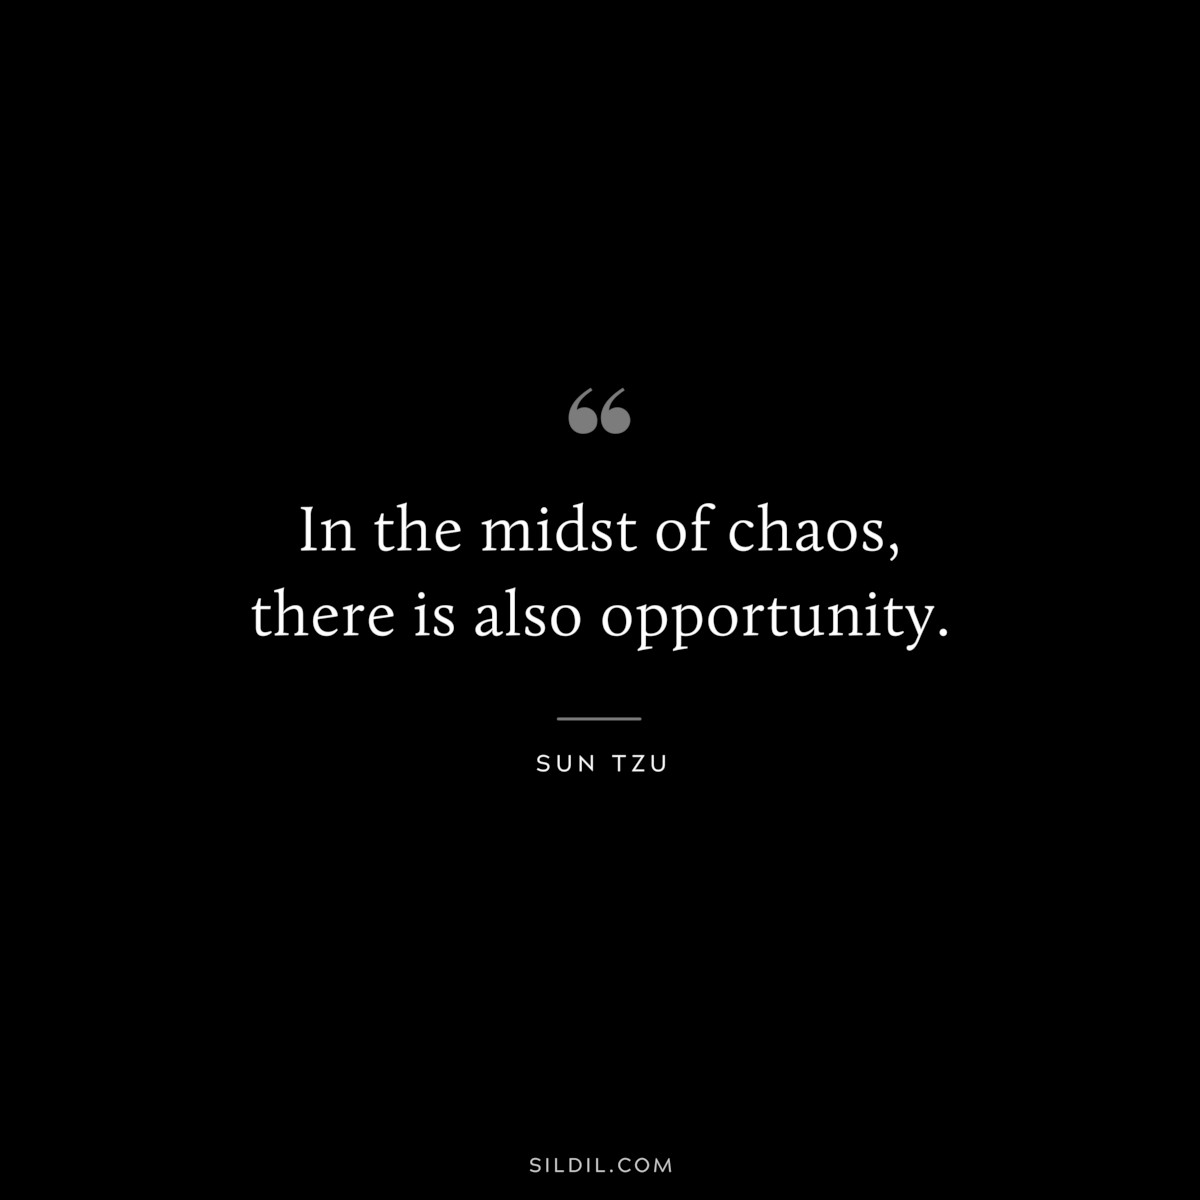 In the midst of chaos, there is also opportunity.― Sun Tzu